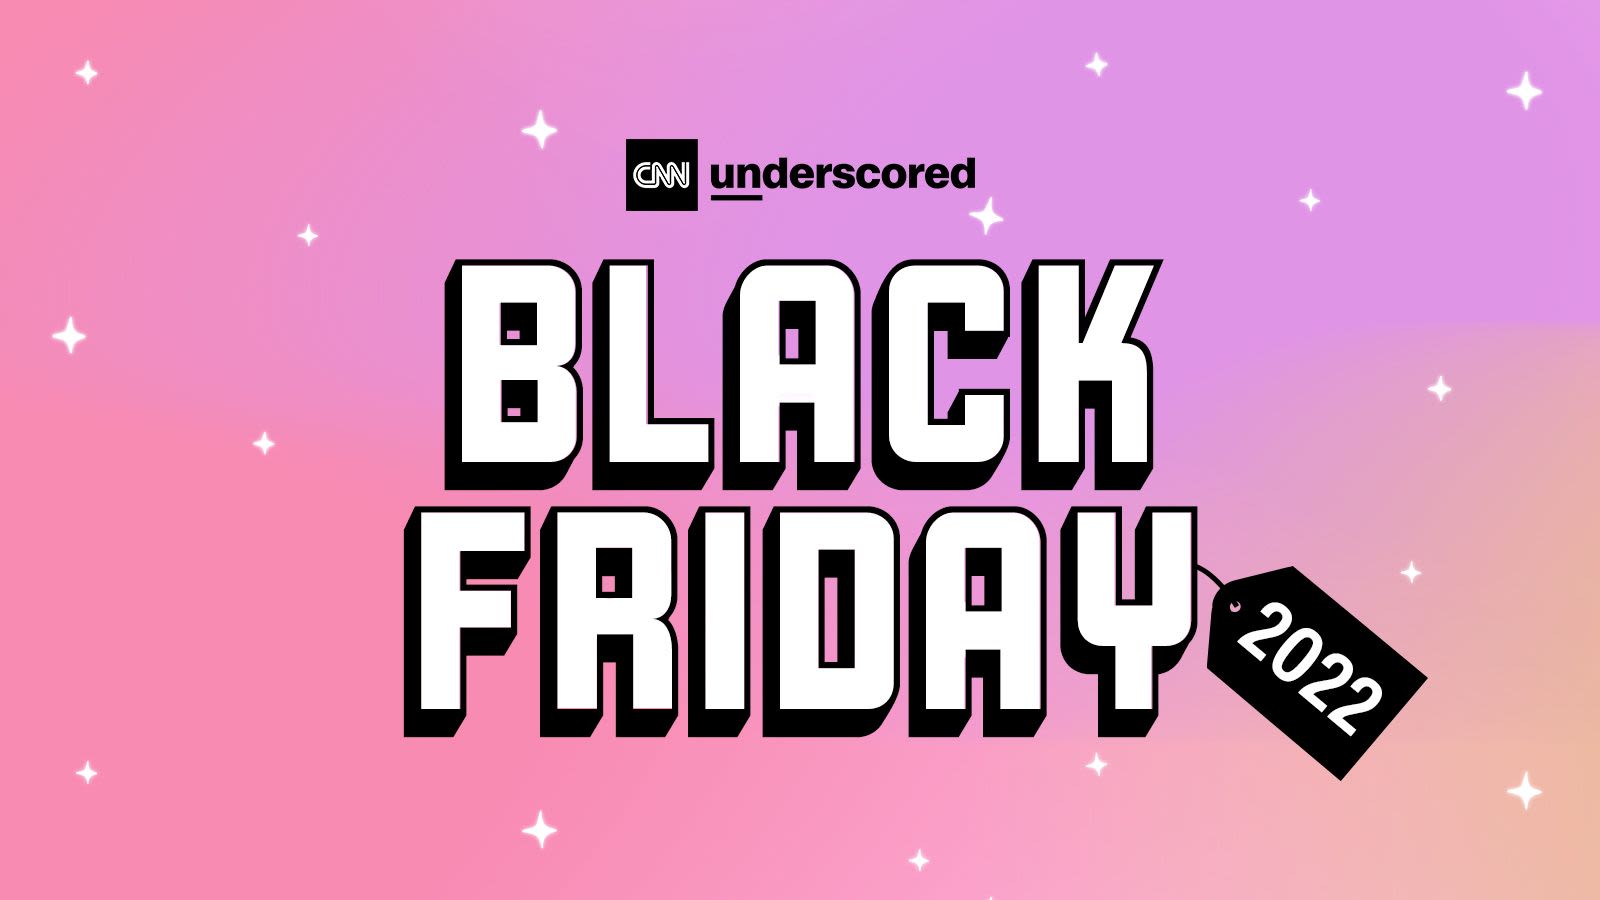 Best Black Friday deals 2022: Top sales right now